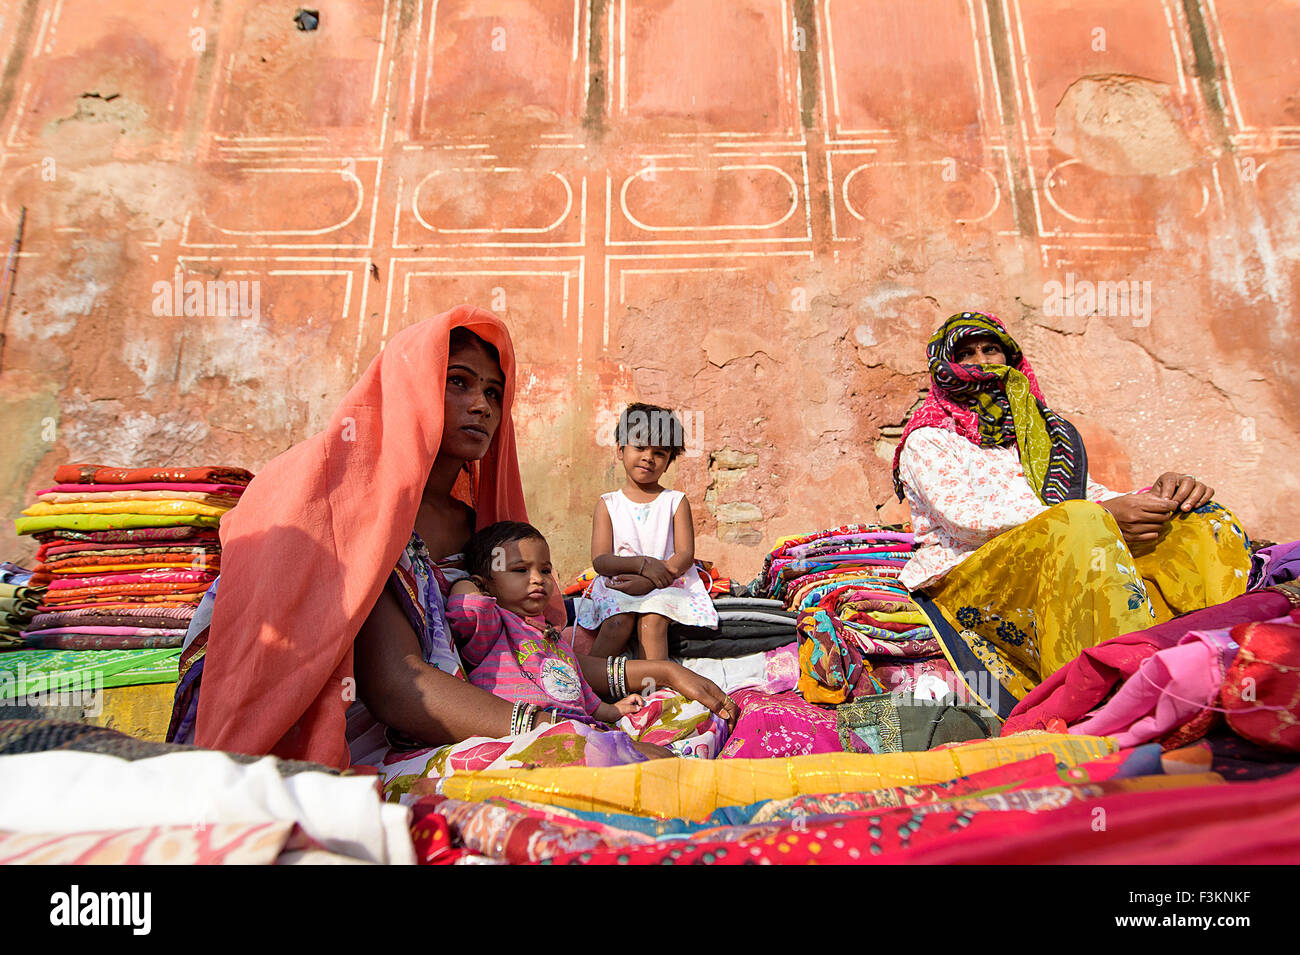 Colourful clothes and saree selling by street vendor during sunday market in Jaipur, India. Stock Photo